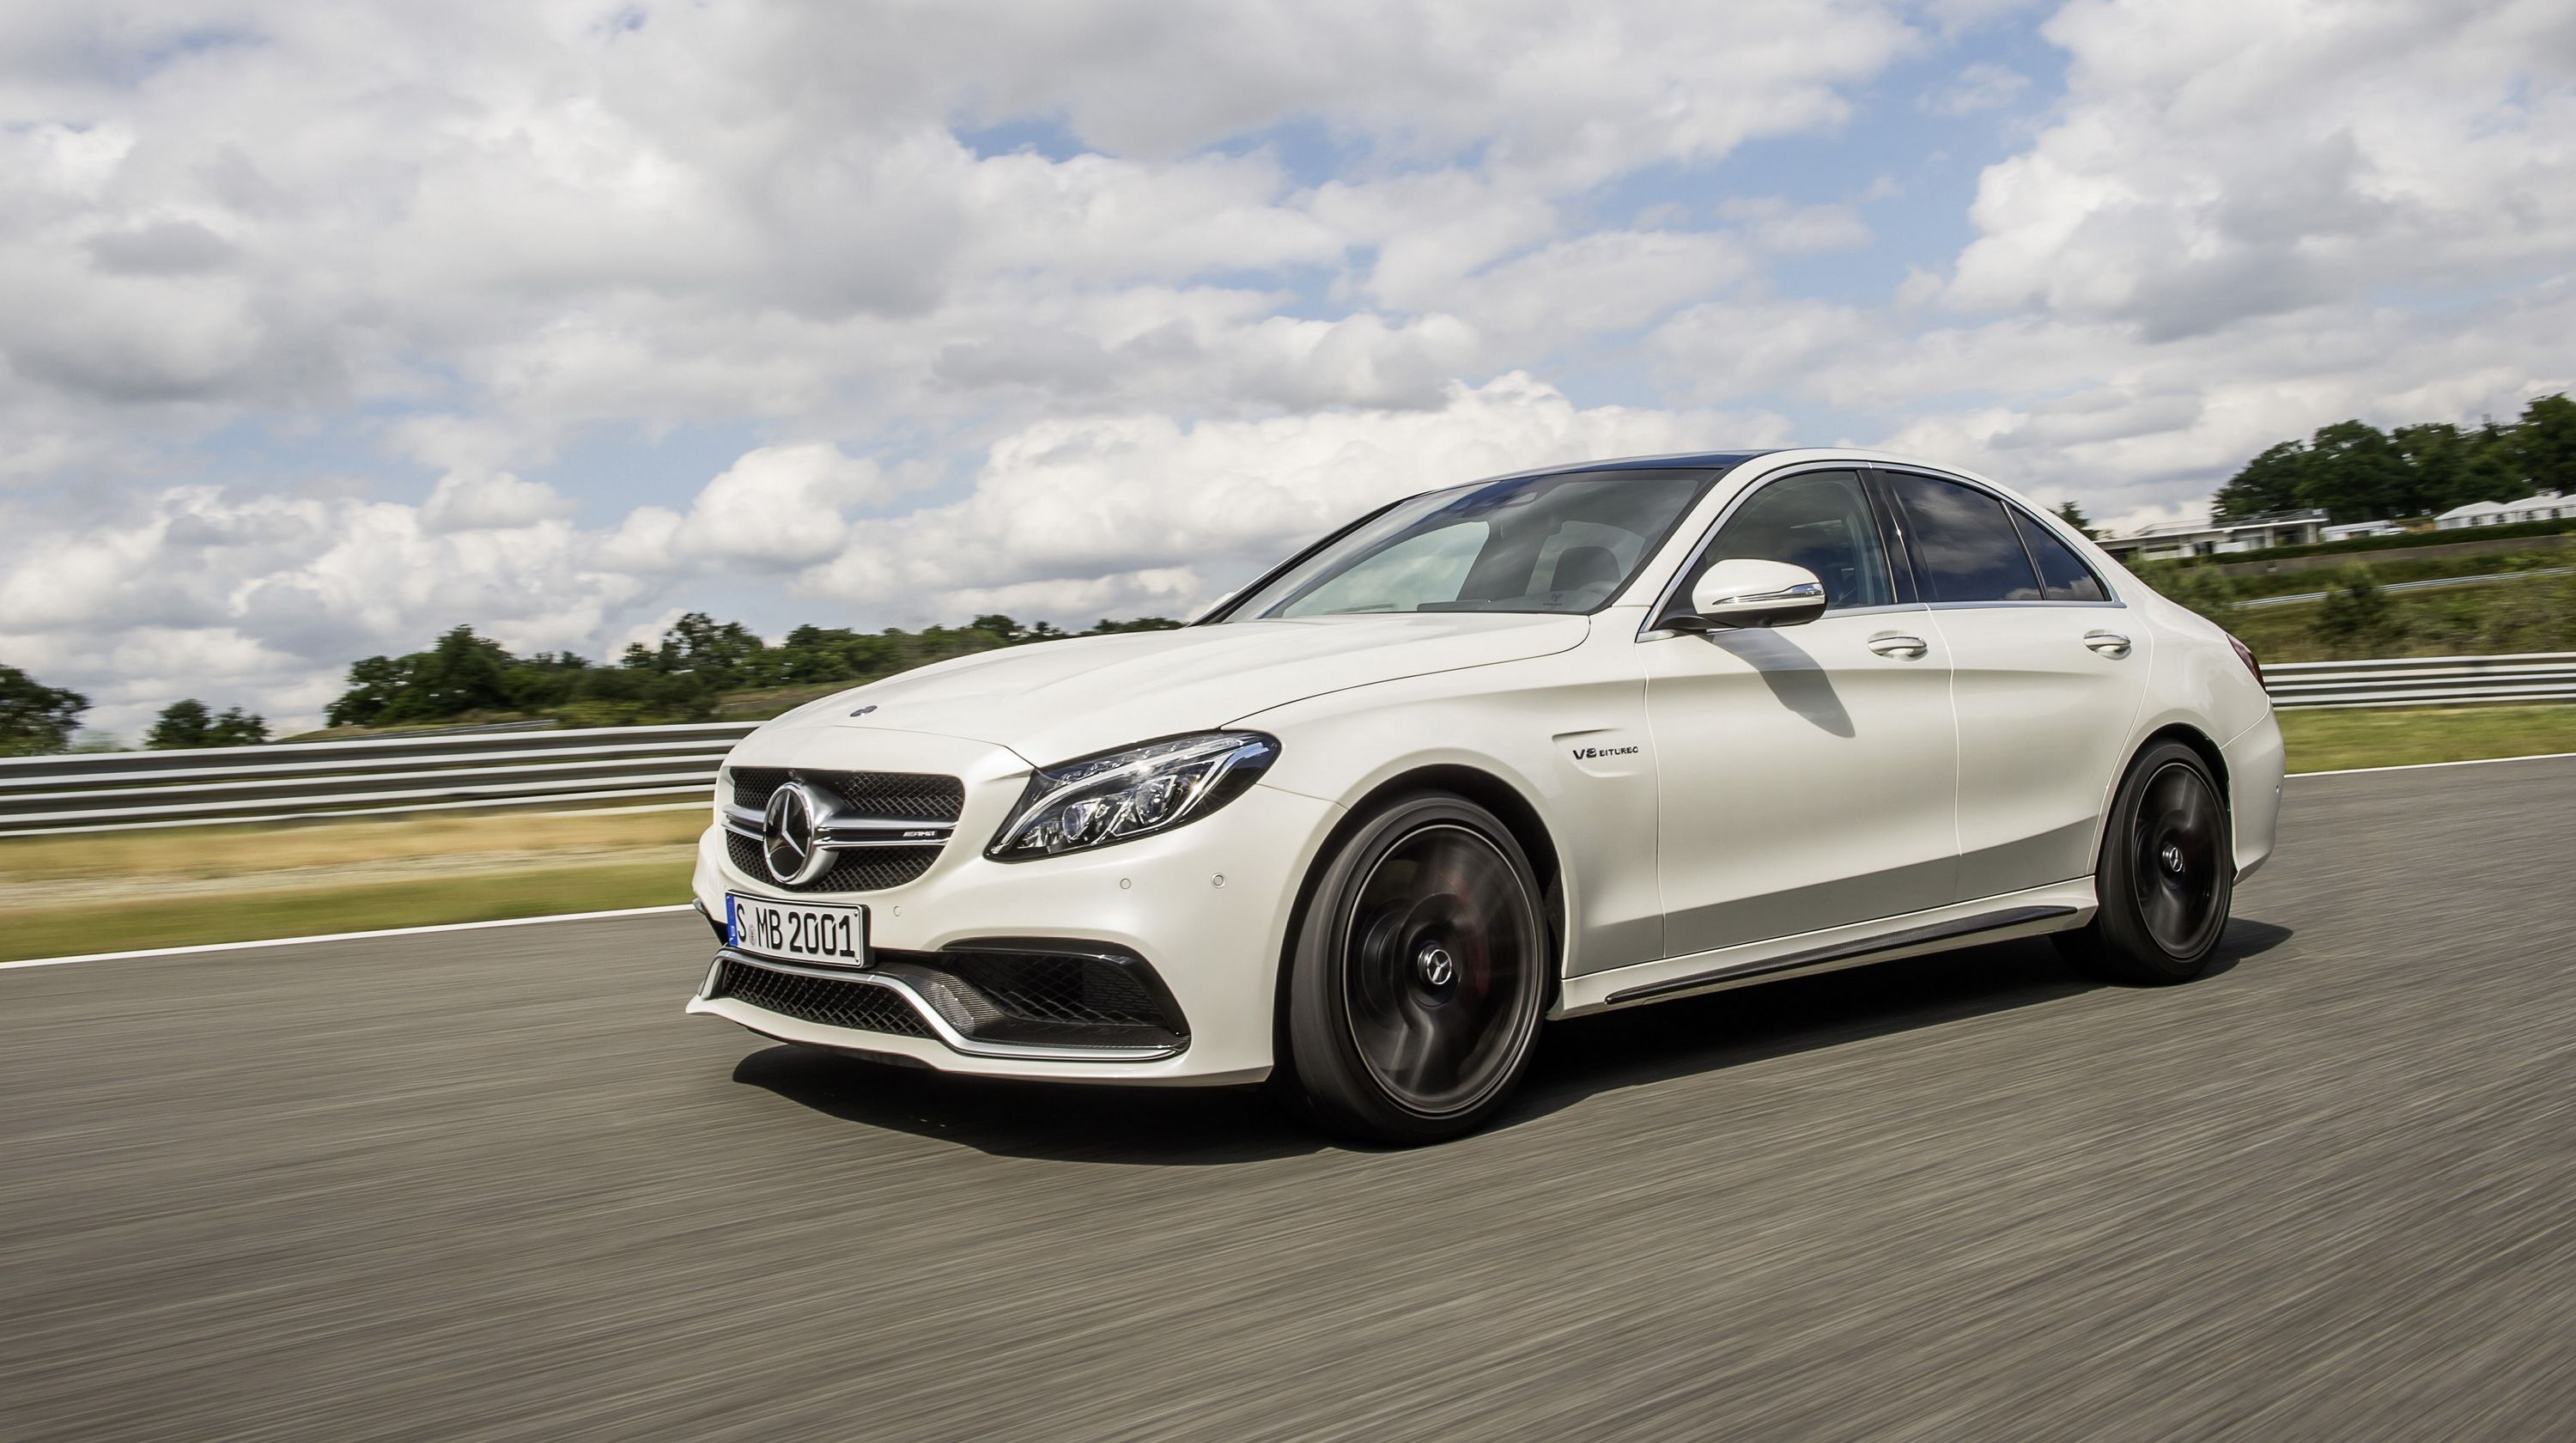 The 2015 Mercedes C63 AMG has finally landed